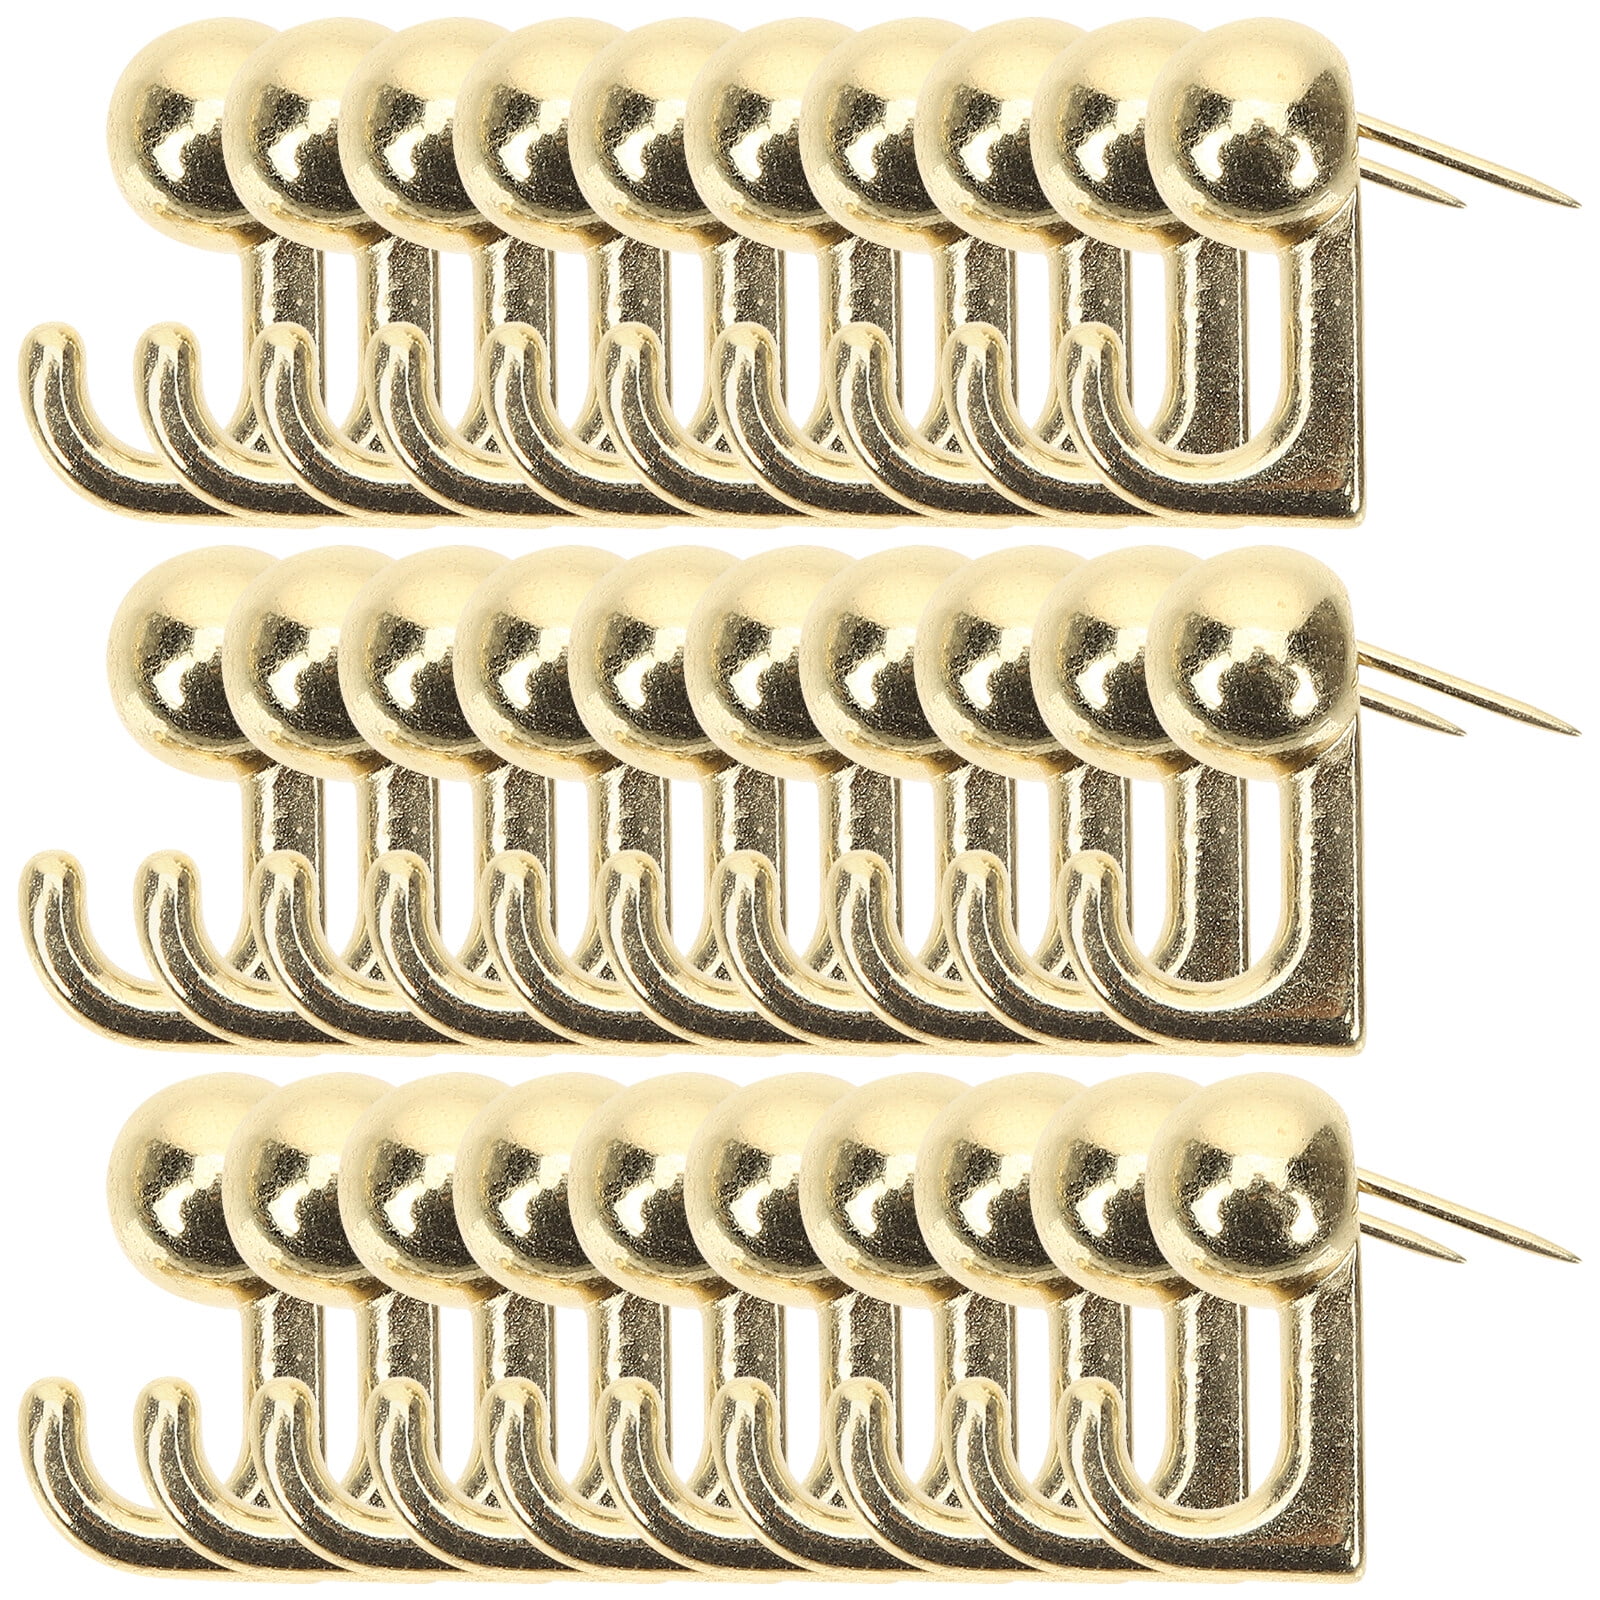 30pcs Push Pin Hangers Wall Picture Hangers Heavy Duty Picture